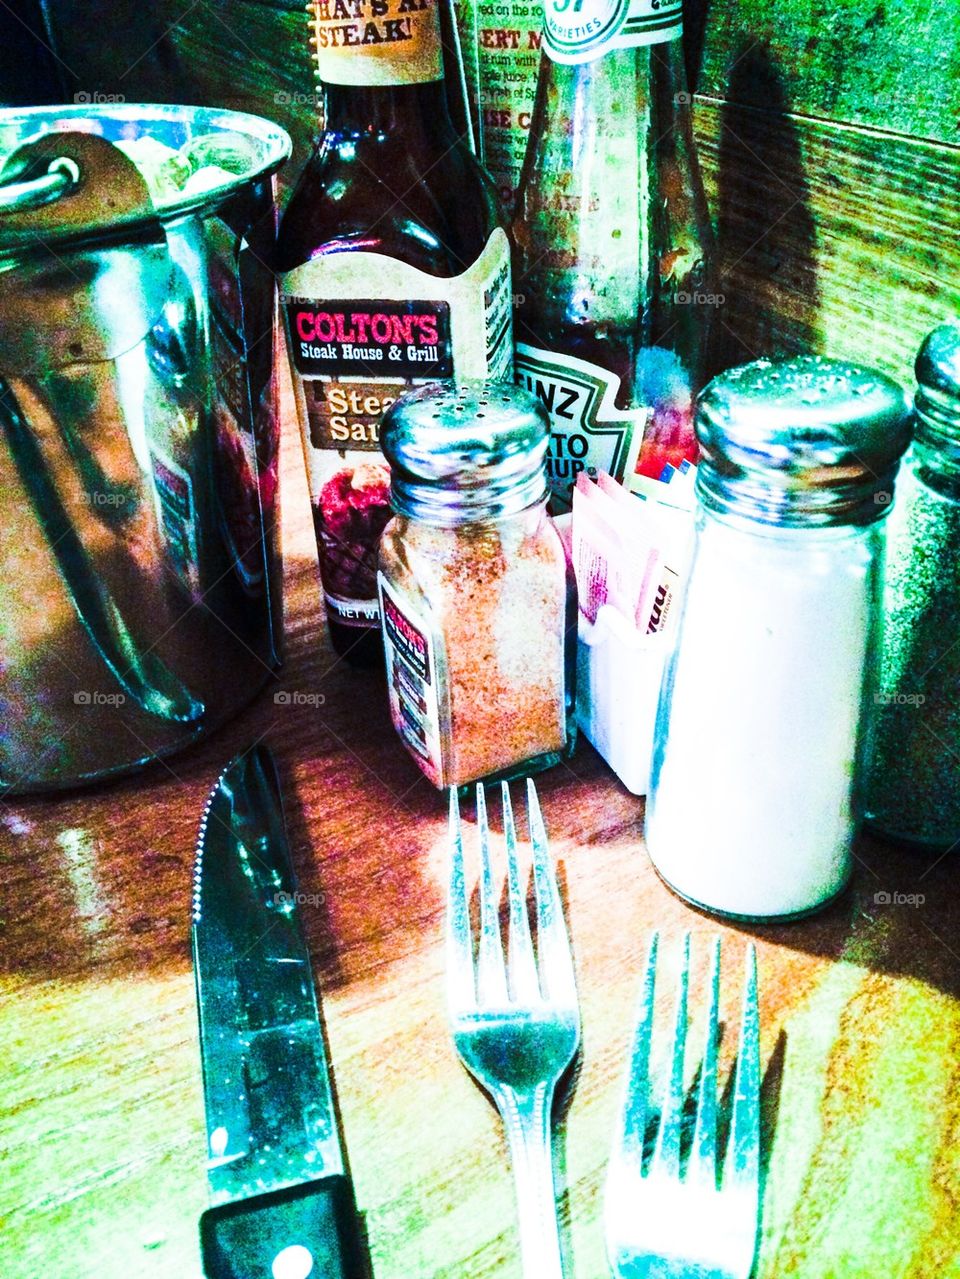 Condiments at rest